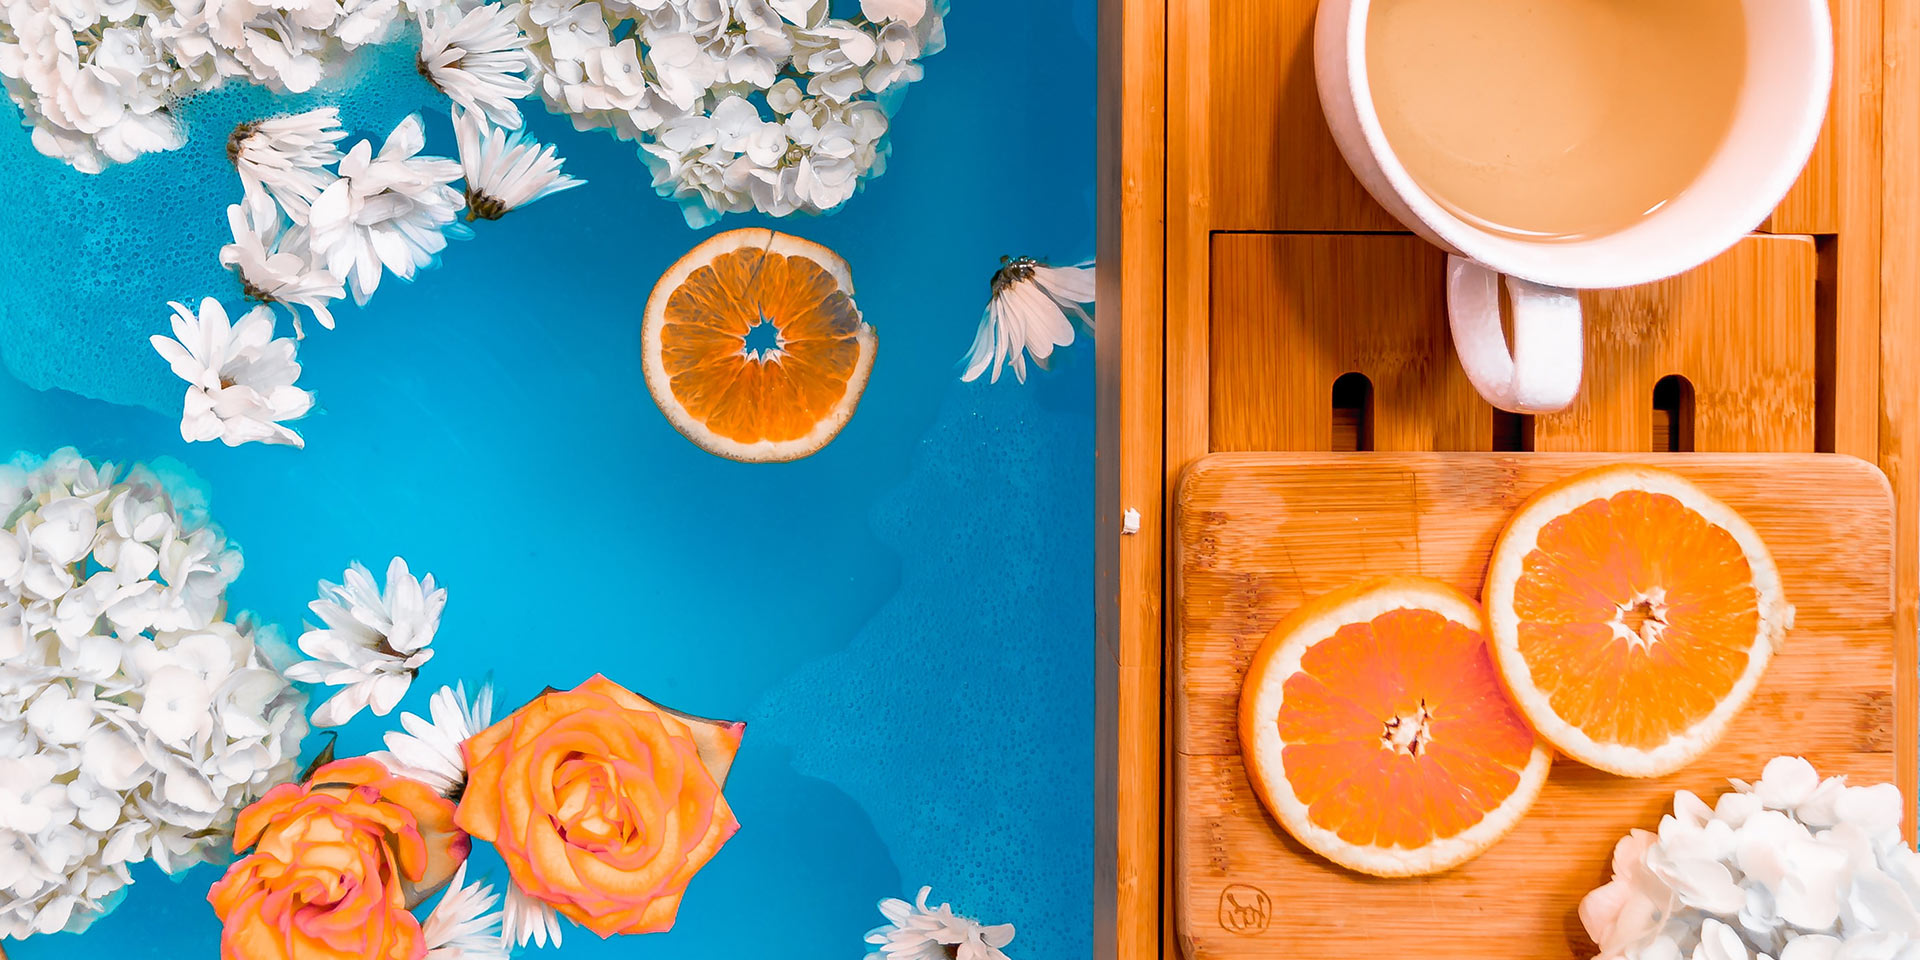 A bubble bath decorated with flowers and oranges with a cup of tea on the side.